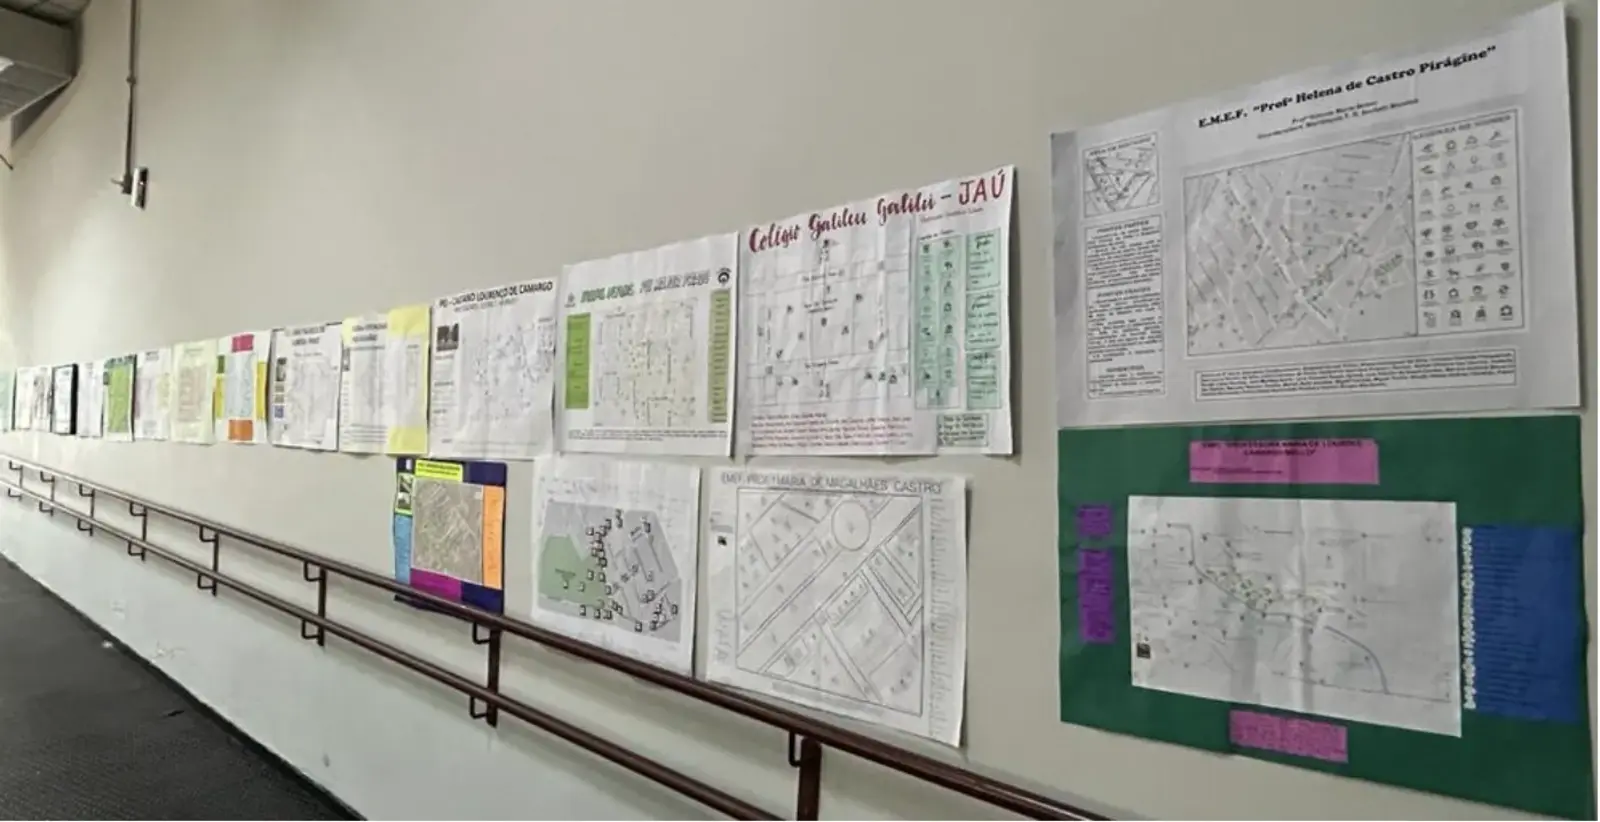 From Facebook: STUDENTS PRESENT SOCIO-ENVIRONMENTAL MAPPING